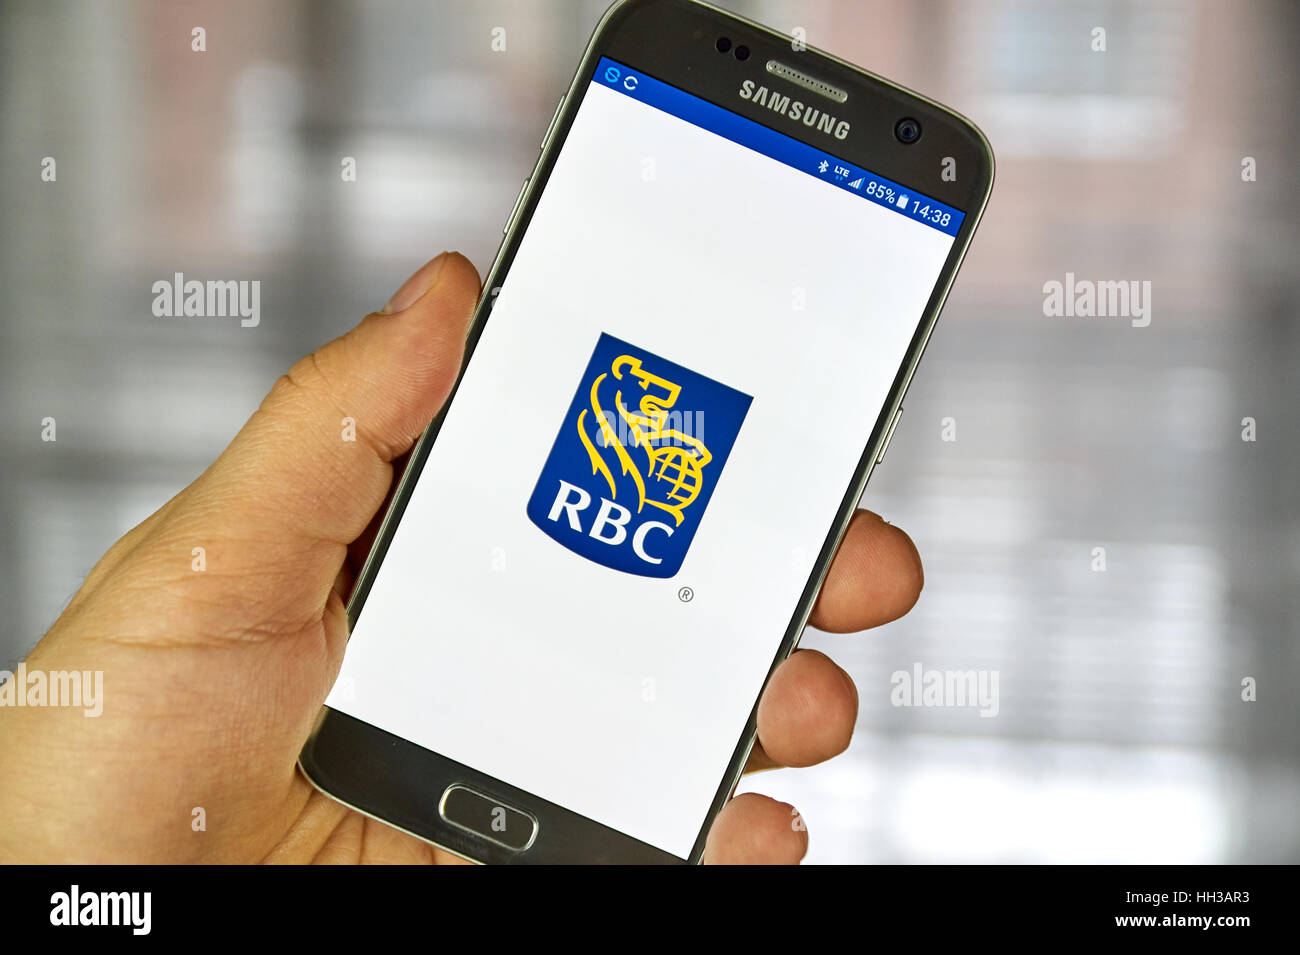 MONTREAL, CANADA - DECEMBER 23, 2016 : RBC logo and mobile app on Samsung S7 screen. The Royal Bank of Canada is a Canadian multinational financial se Stock Photo